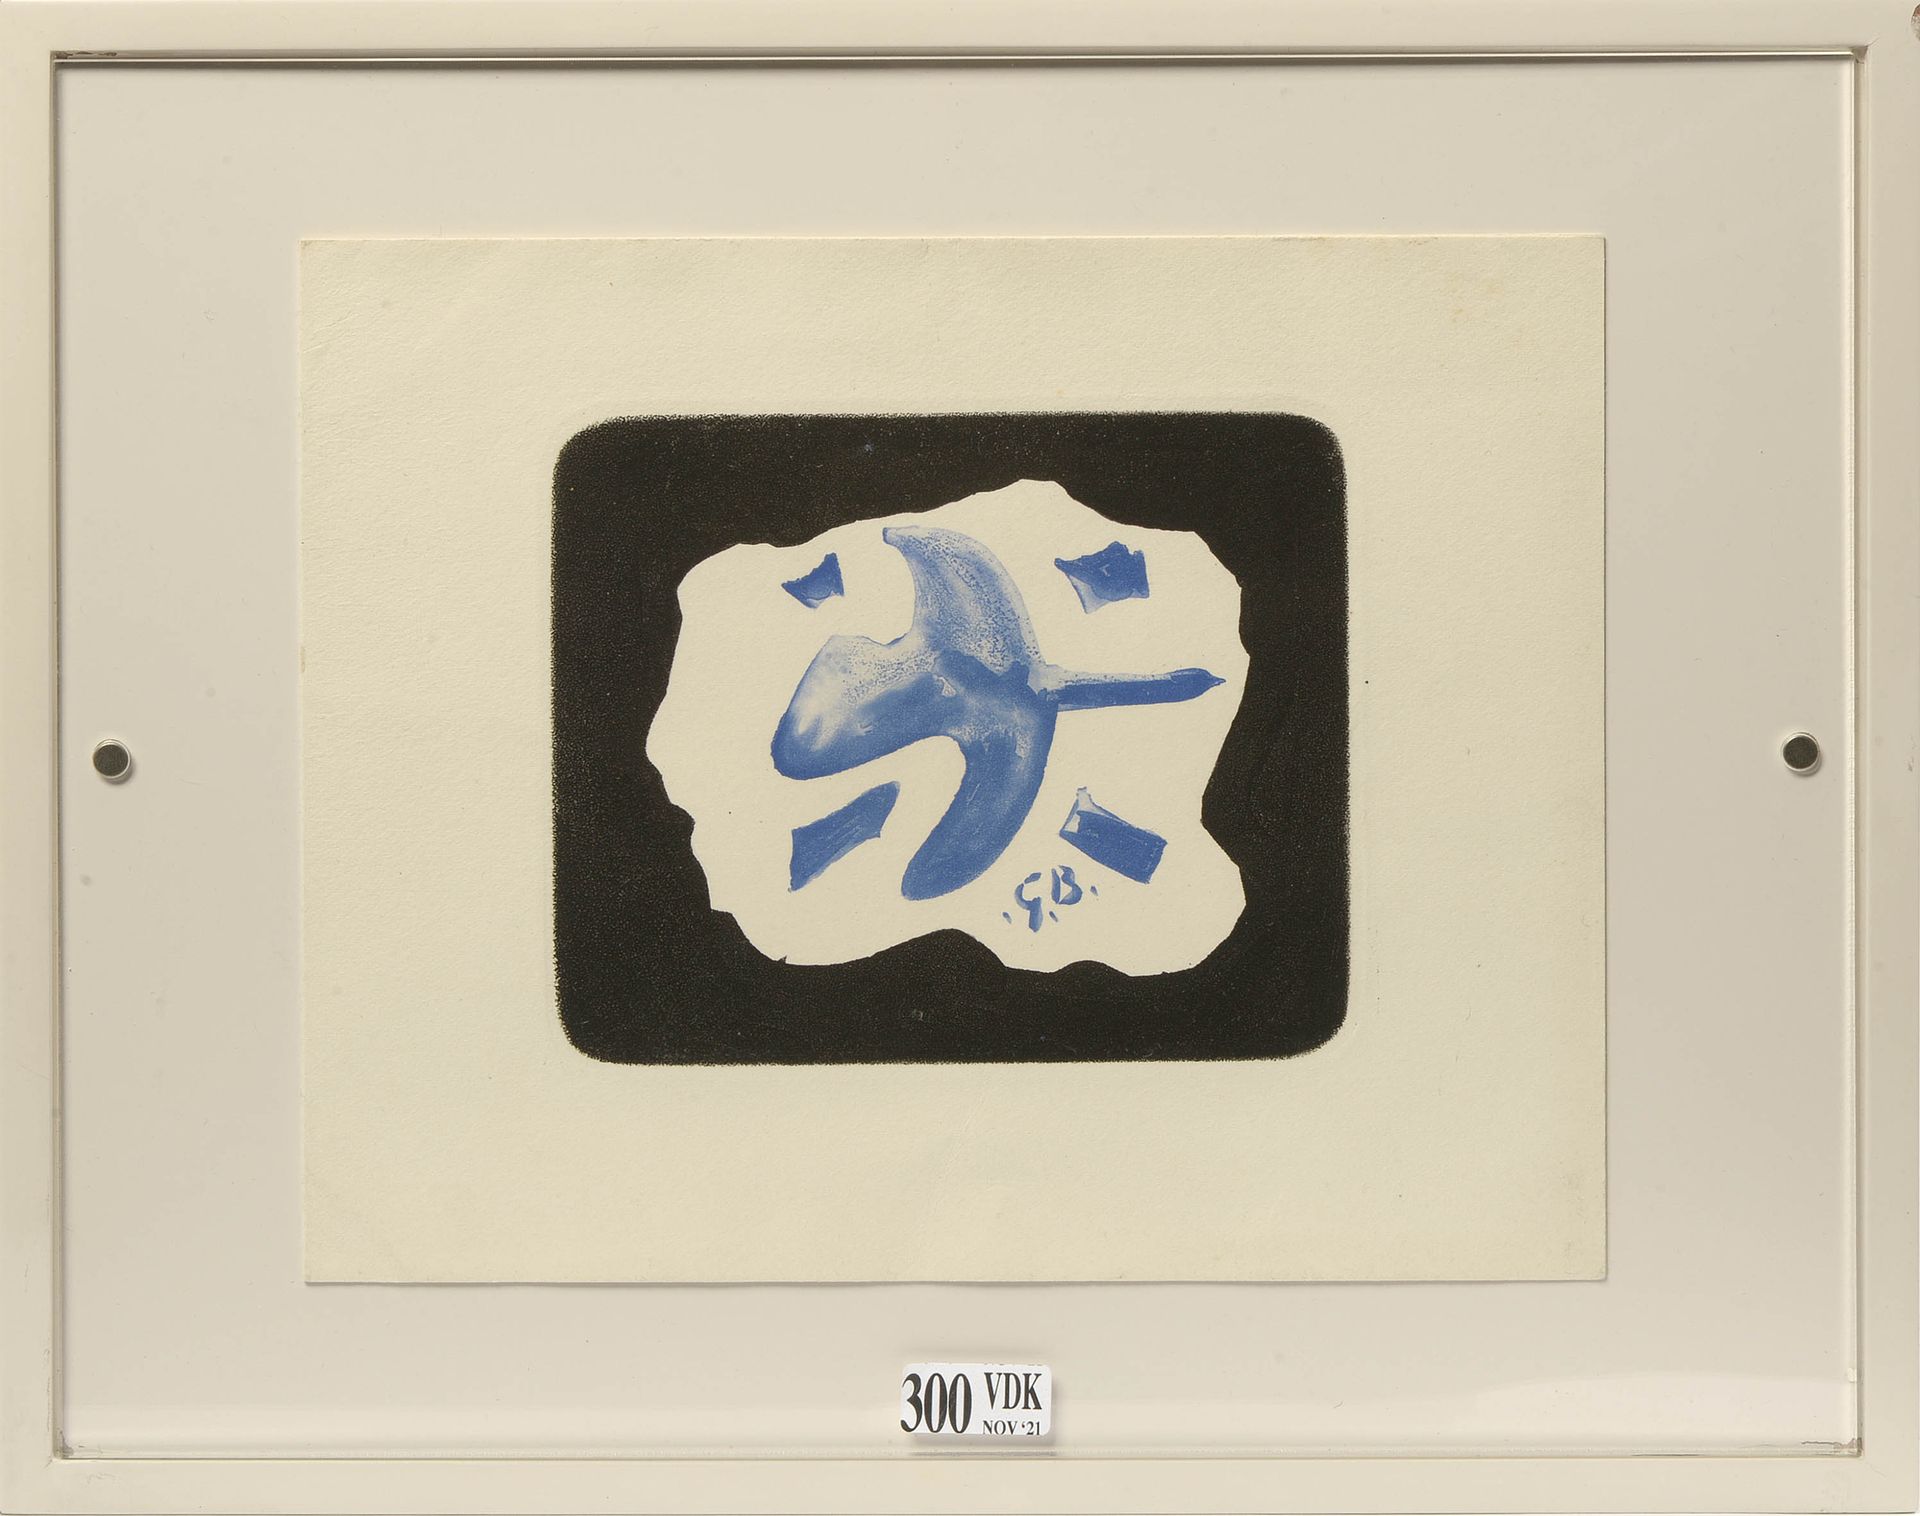 BRAQUE Georges (1882 - 1963) "Greeting card with two leaves from the Aimé Maeght&hellip;